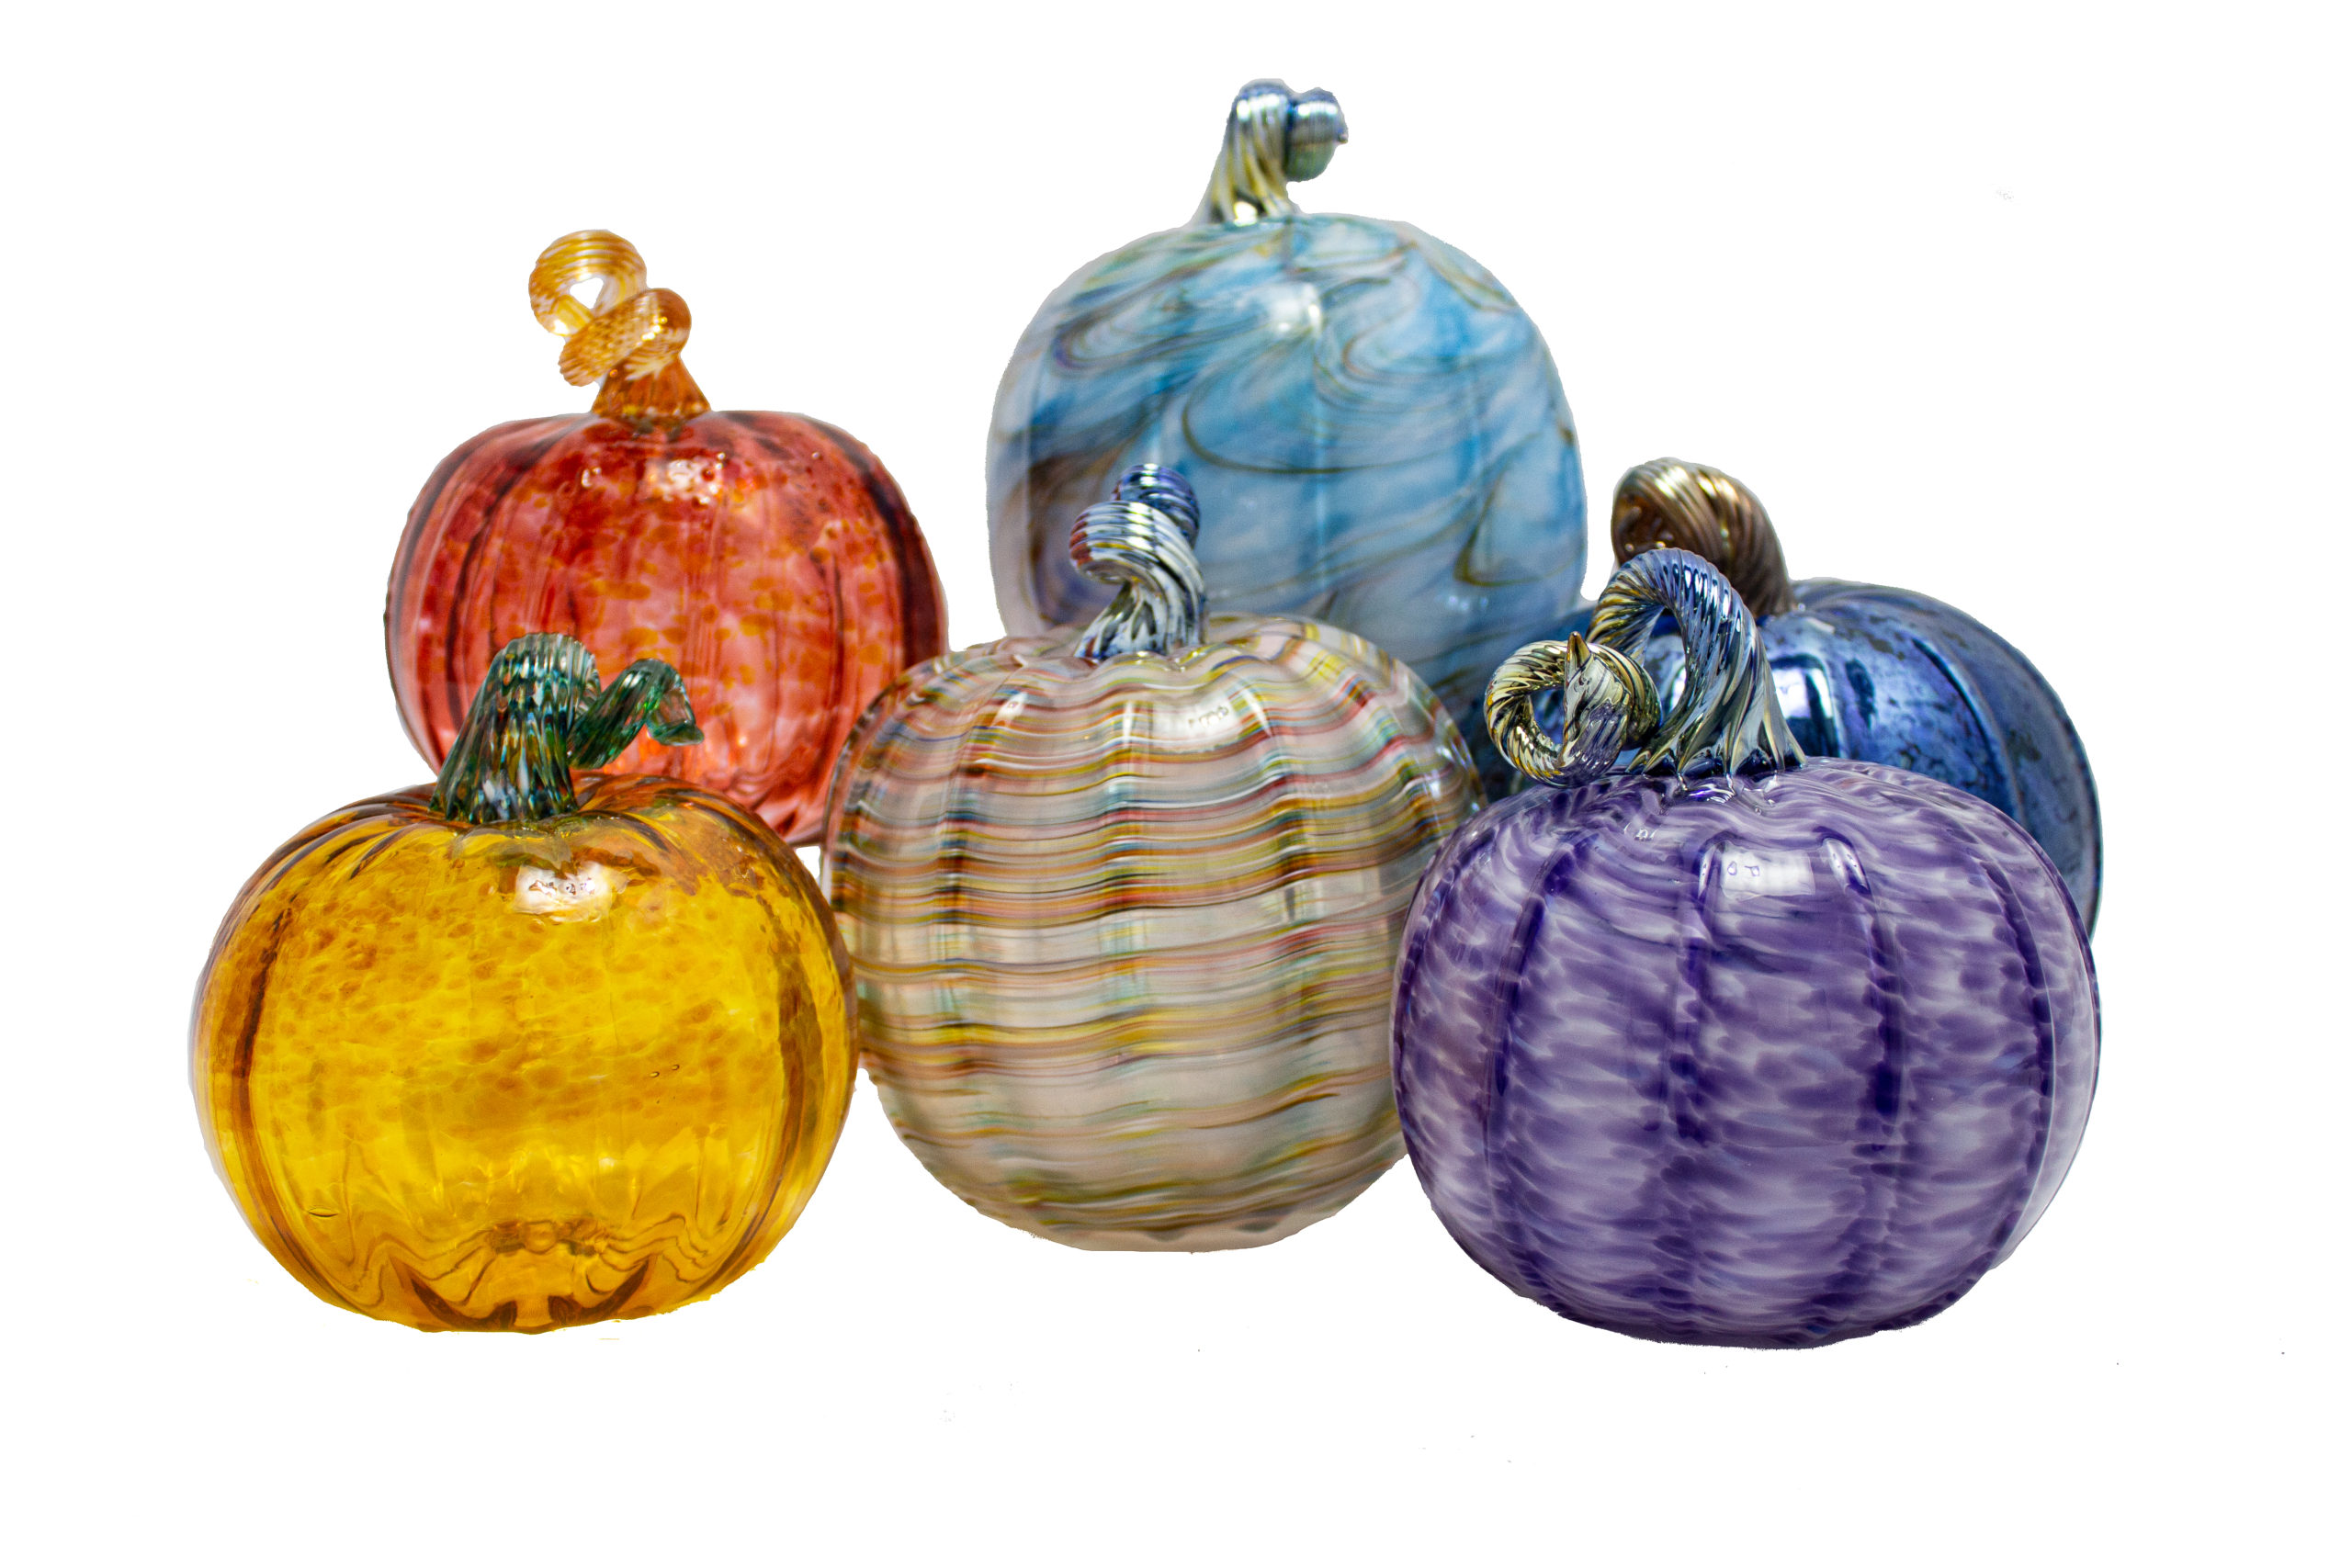 Six glass-blown pumpkins of various sizes and shapes.